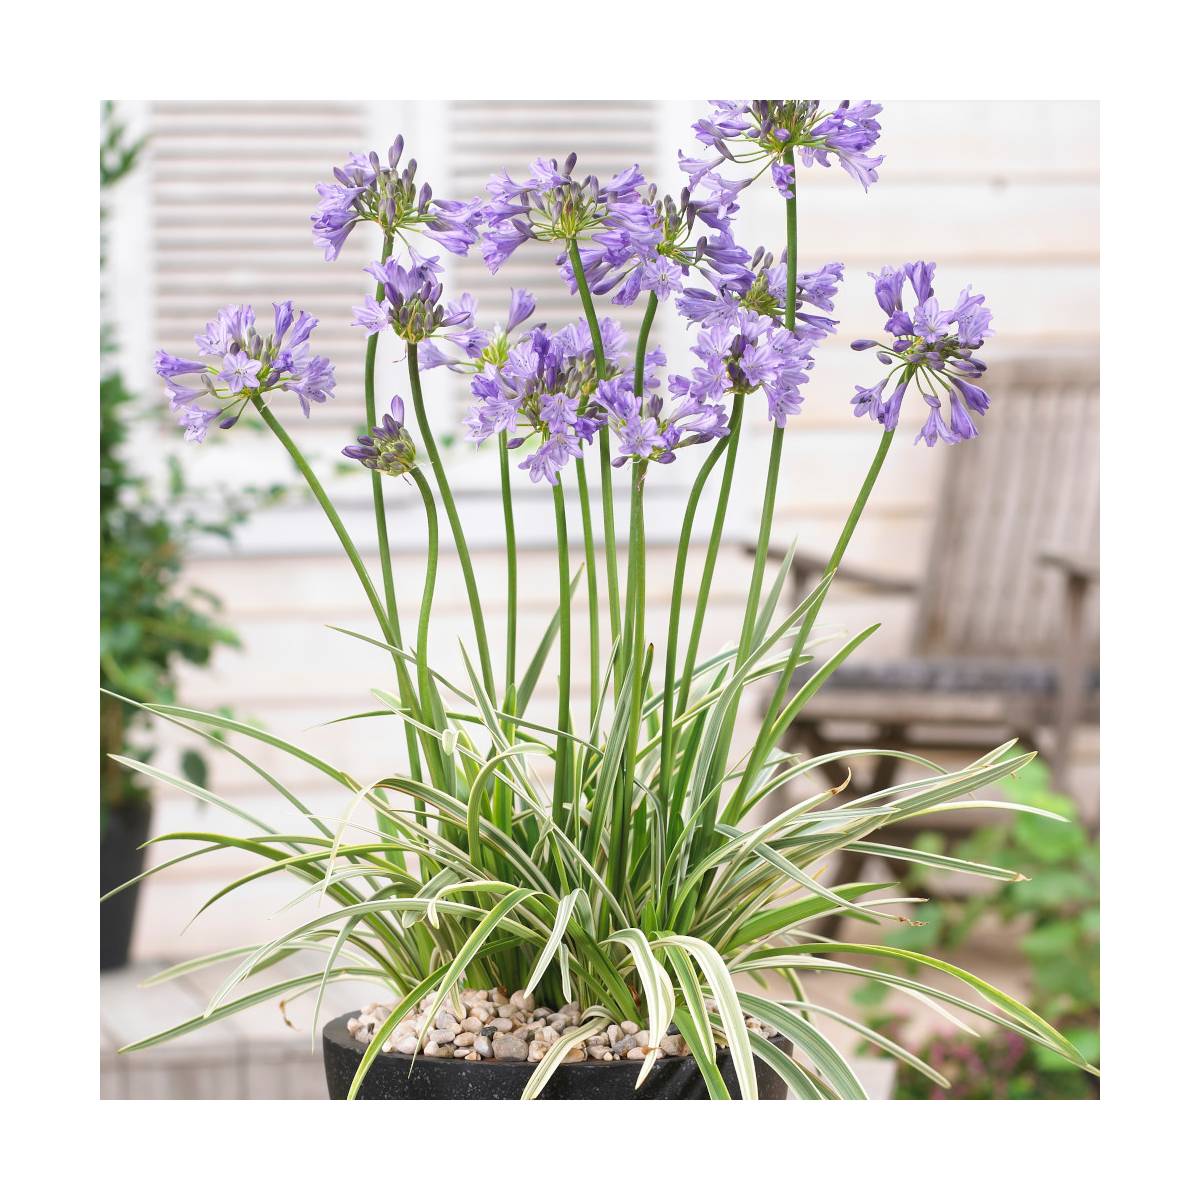 Agapanthe silver moon® 'notfred'/agapanthus x silver moon® 'notfred'[-]pot de 3l - 20/40 cm